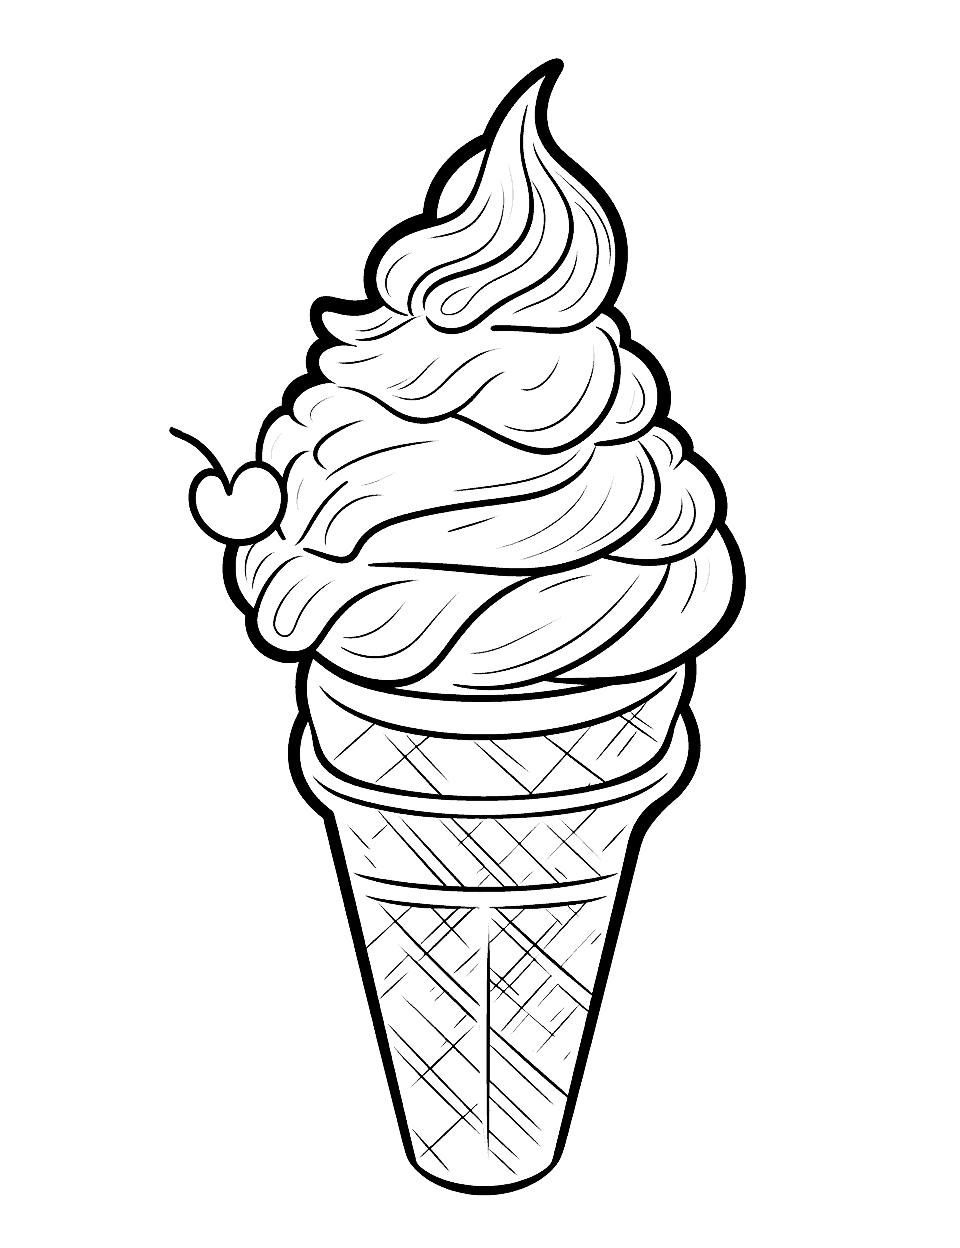 Ice Cream Dream Coloring Page - A simple and big image of ice cream suitable for preschool coloring.